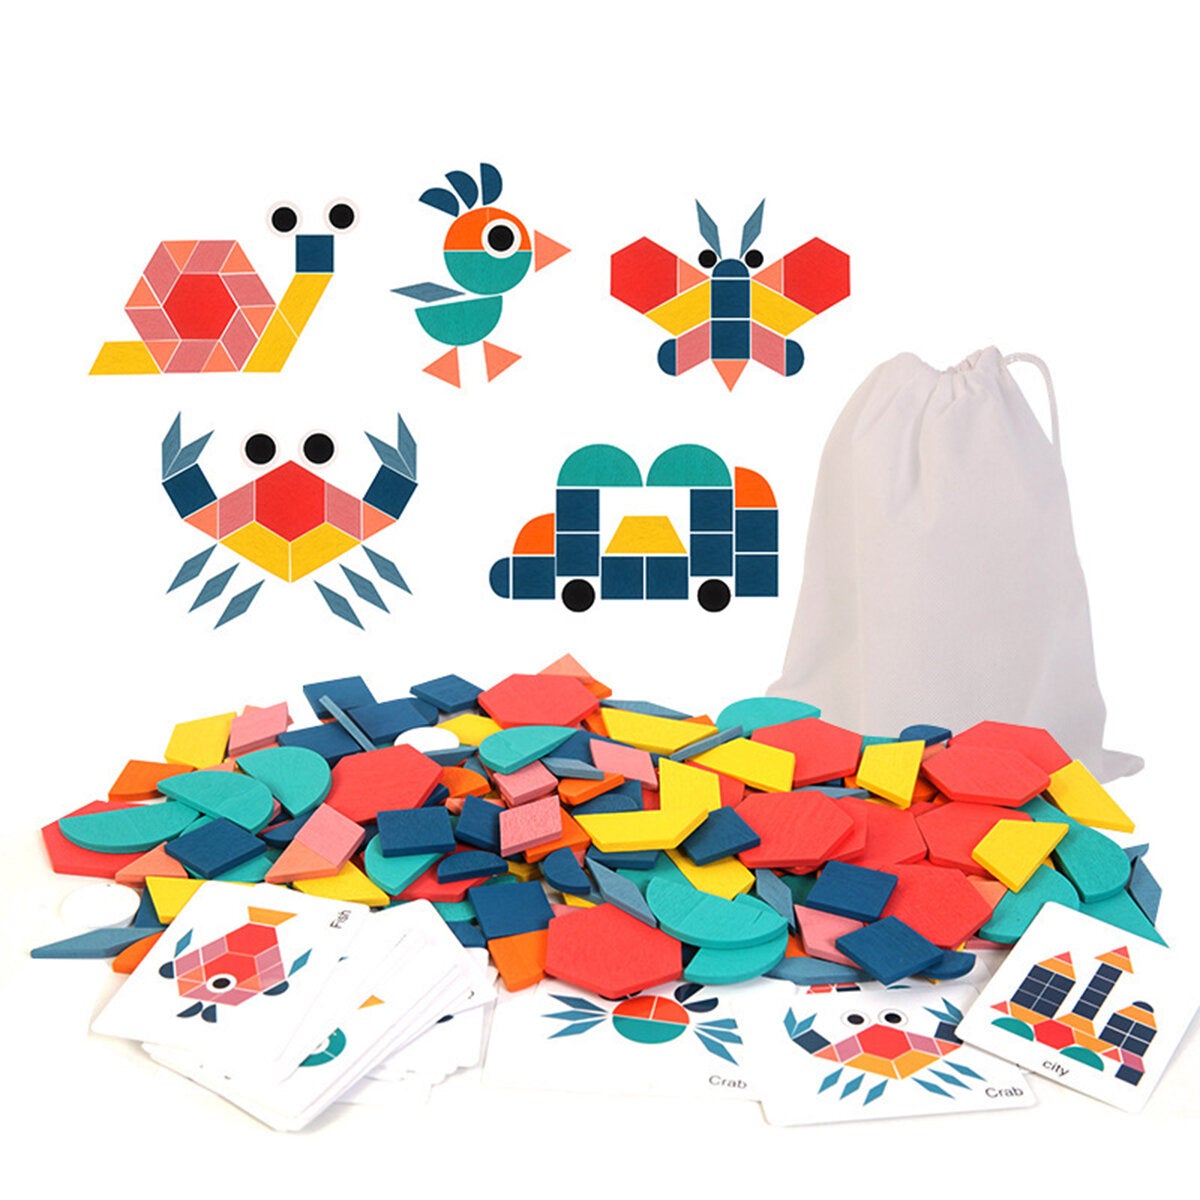 180 Pcs Colorful Creative Multi-Shape Puzzle Develop Thinking Ability Educational Toy with Bag for Kids Gift